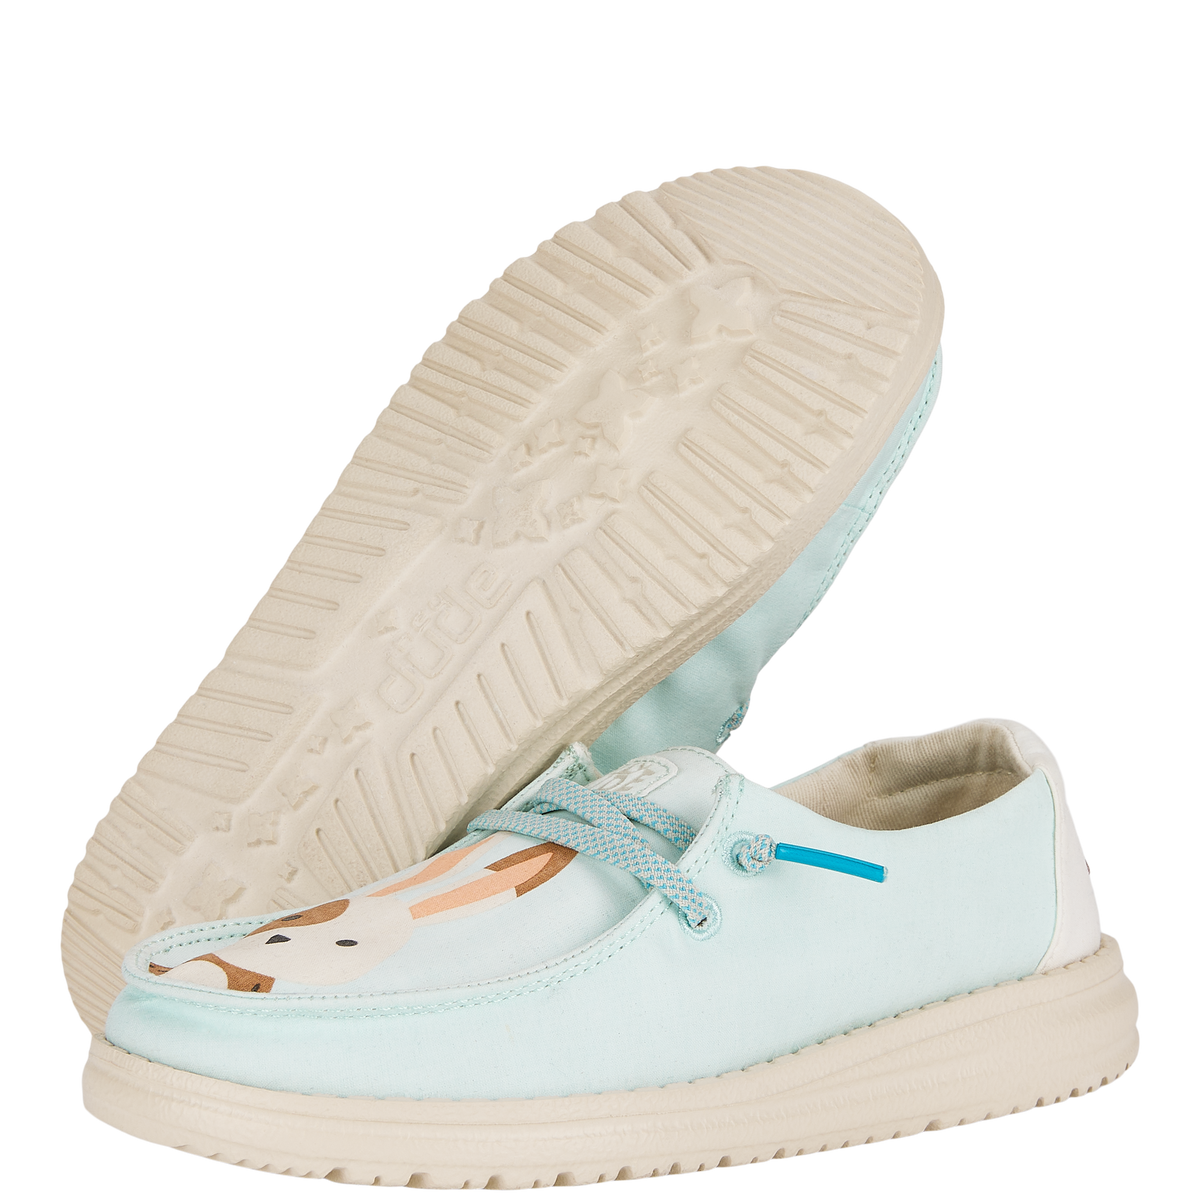 Wendy Toddler Critters - Light Blue